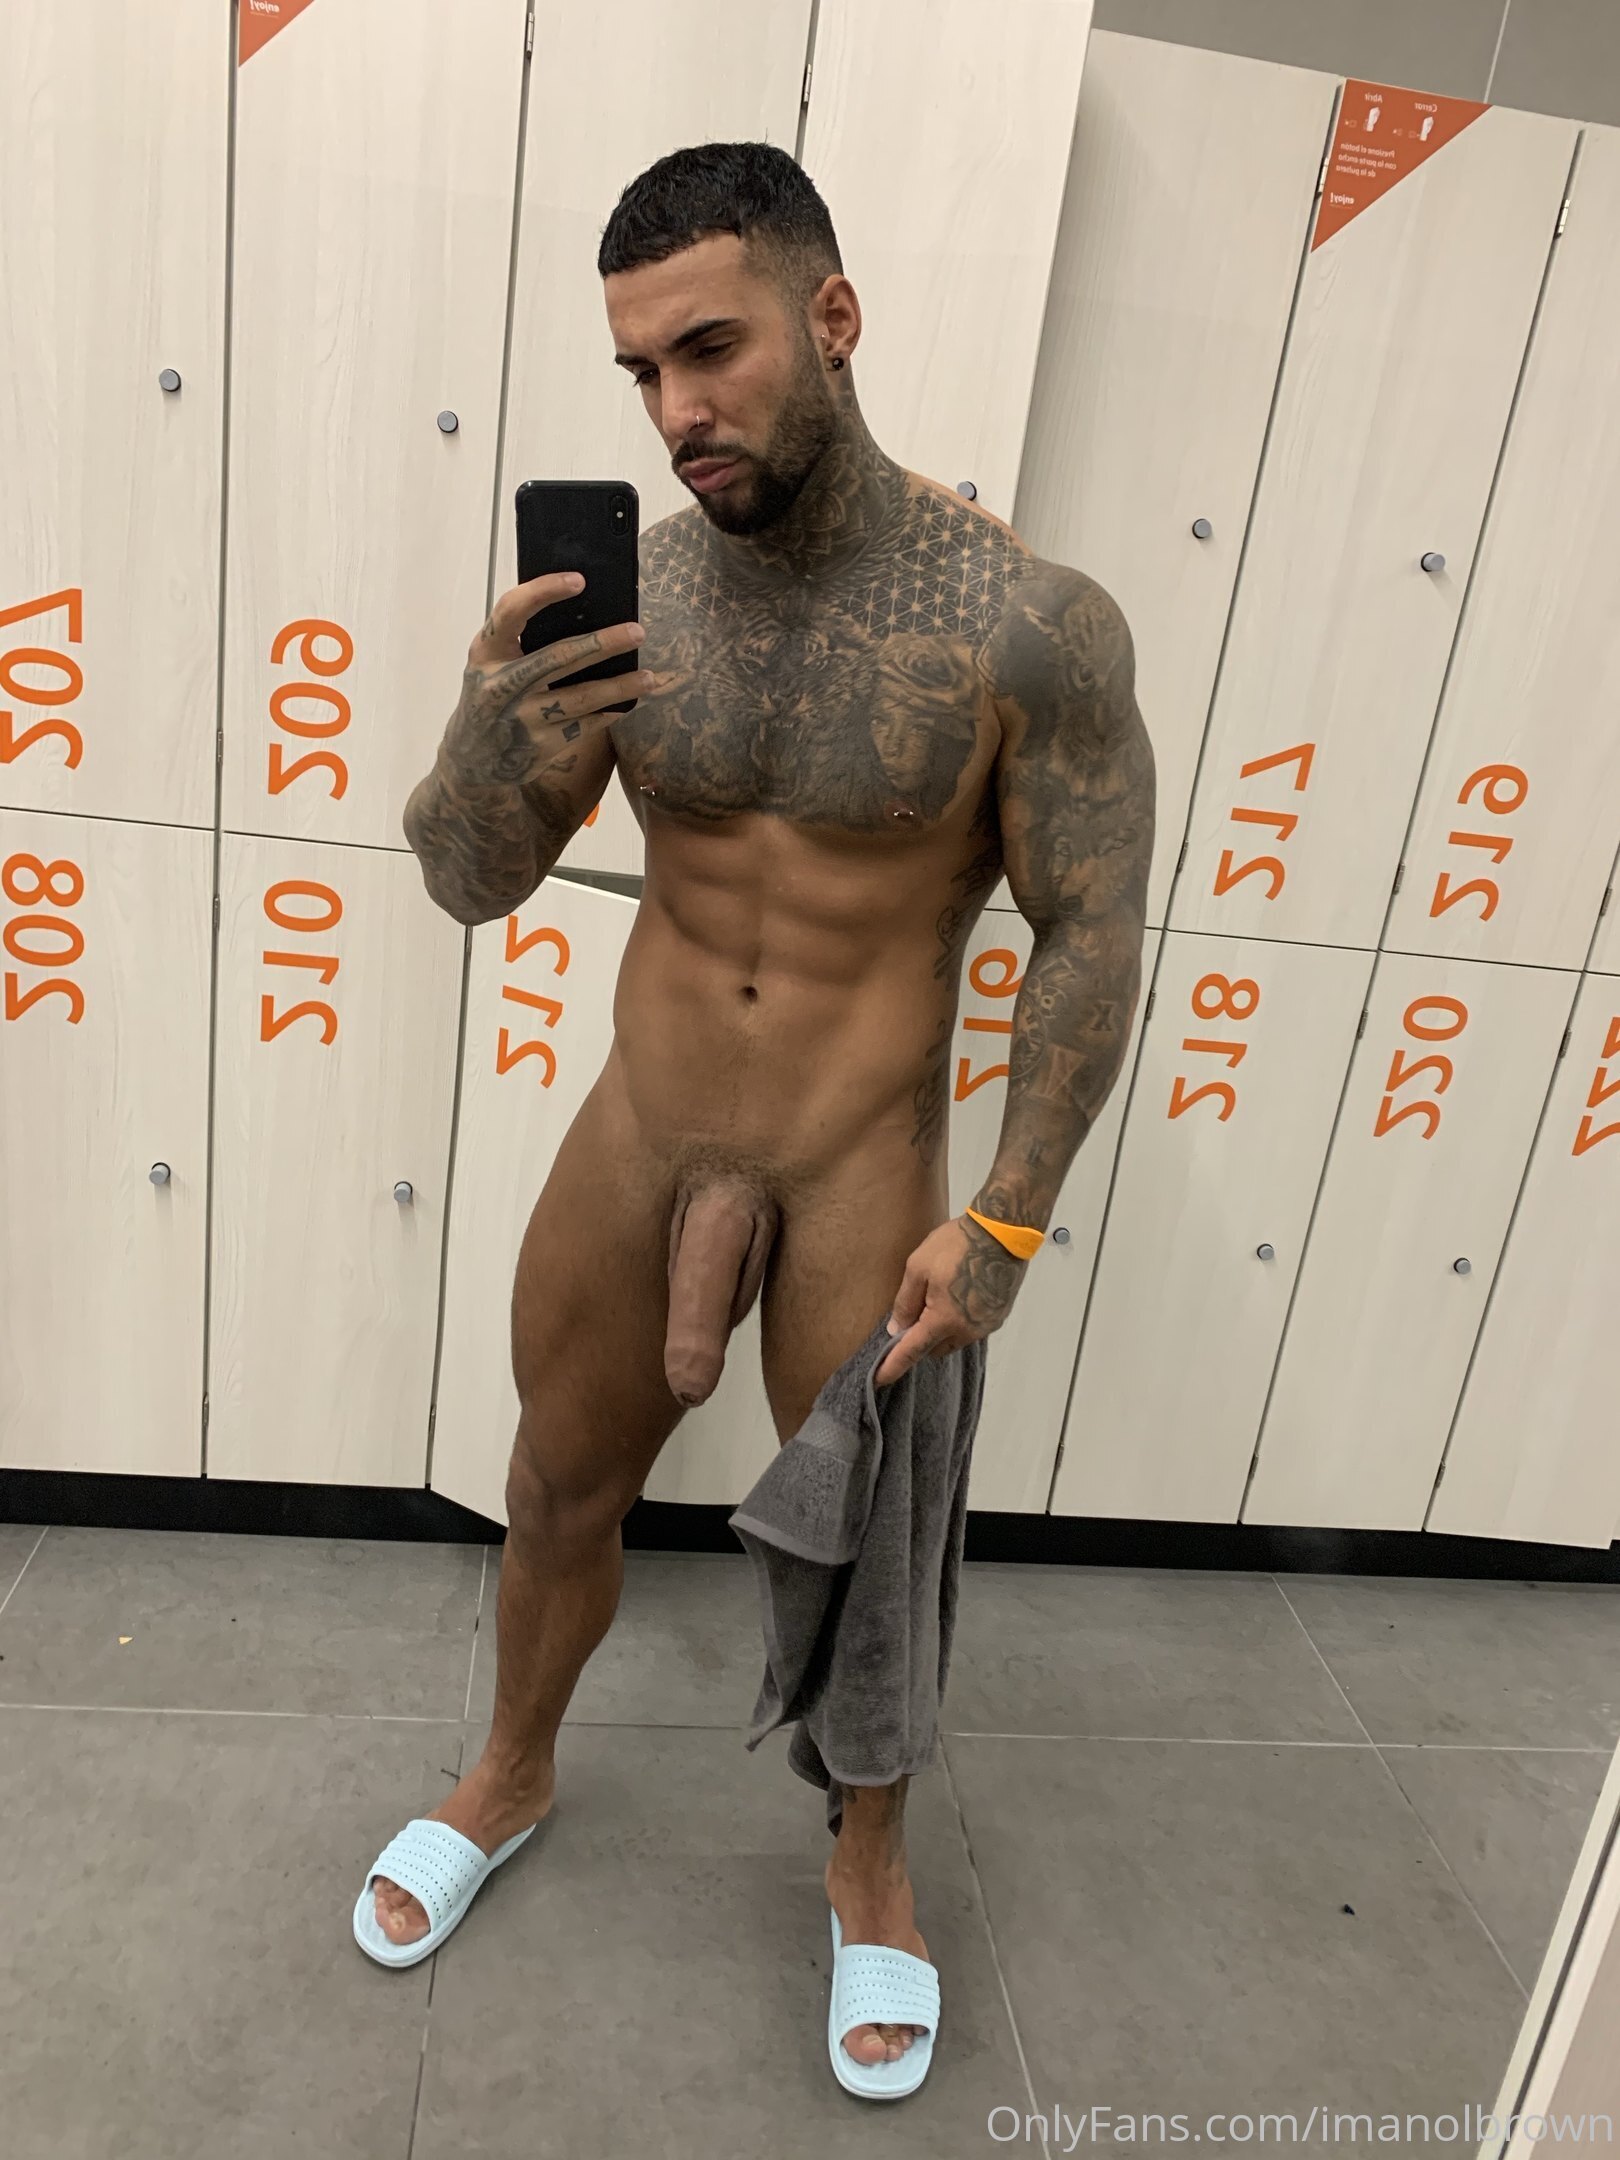 Only Fans - Imanol Brown.